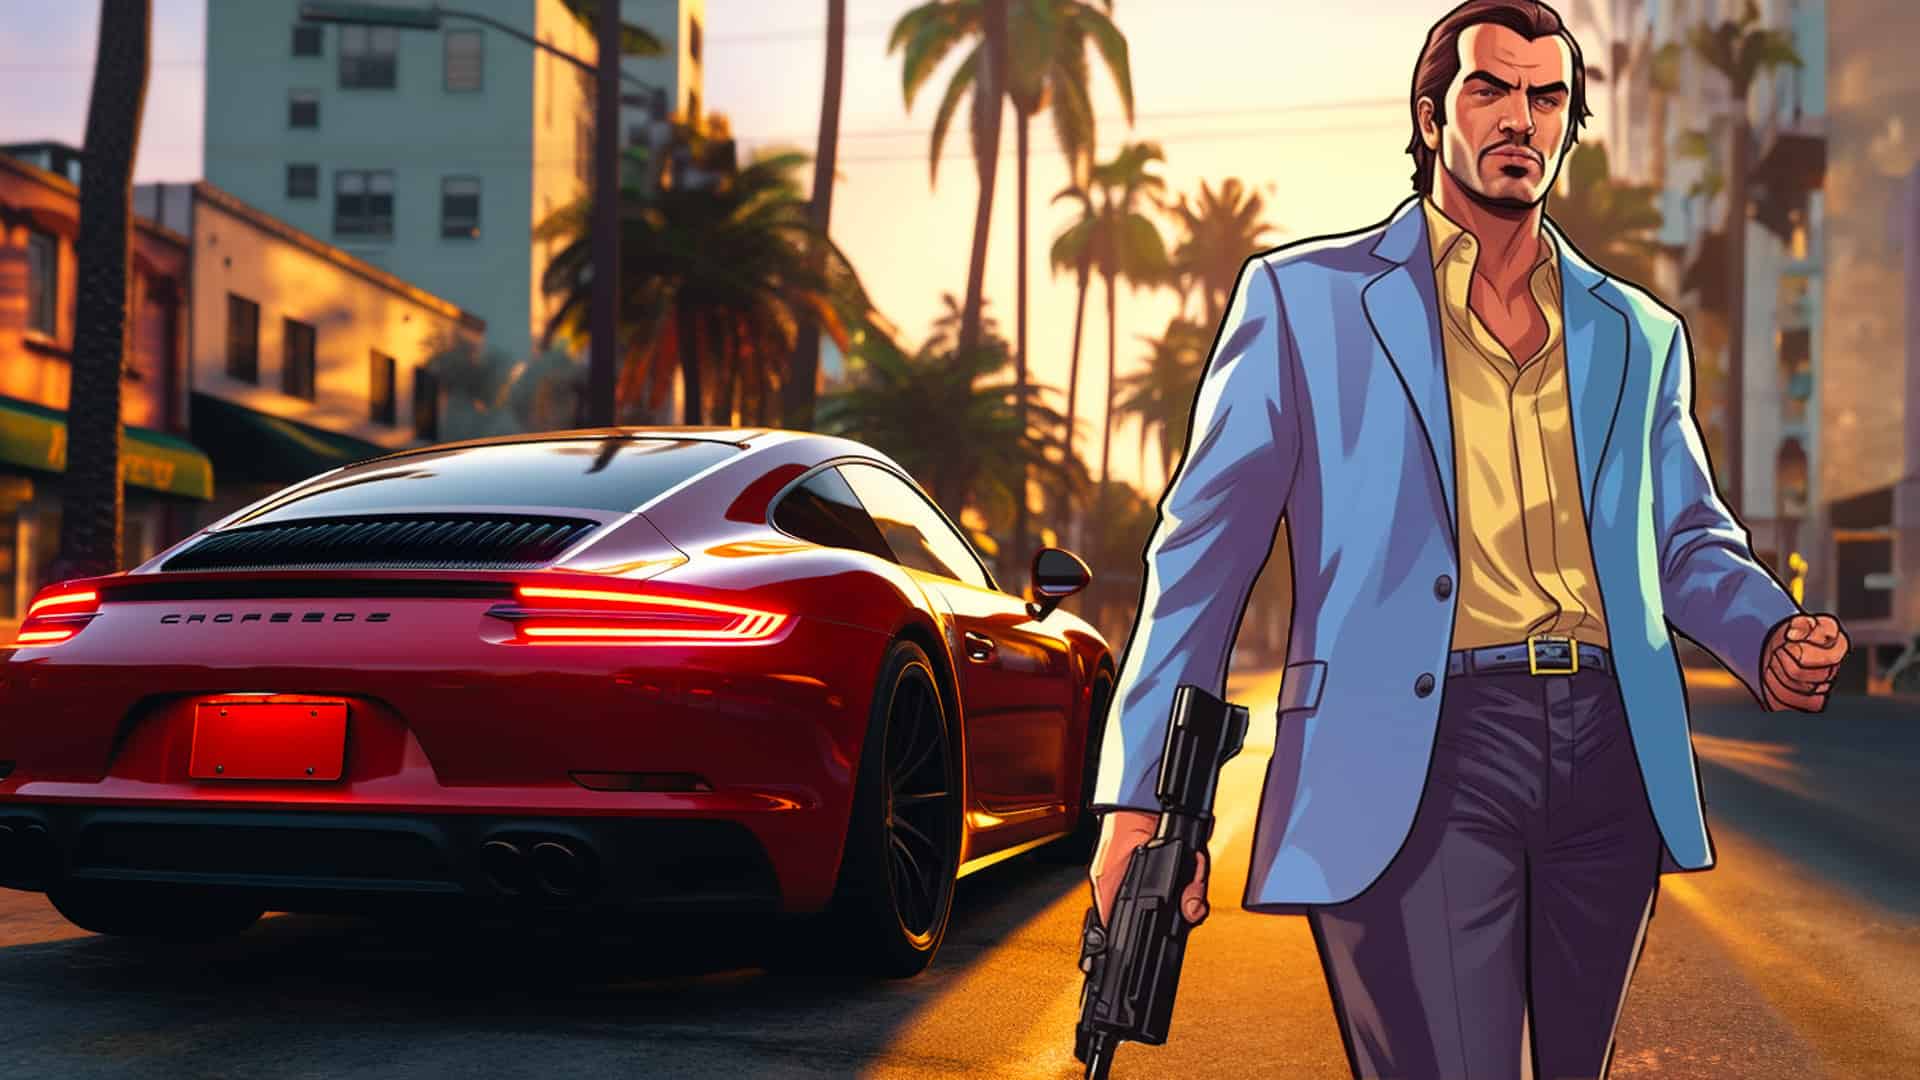 I TRIED SOME WORST GTA - 6 Games from PlayStore!! 